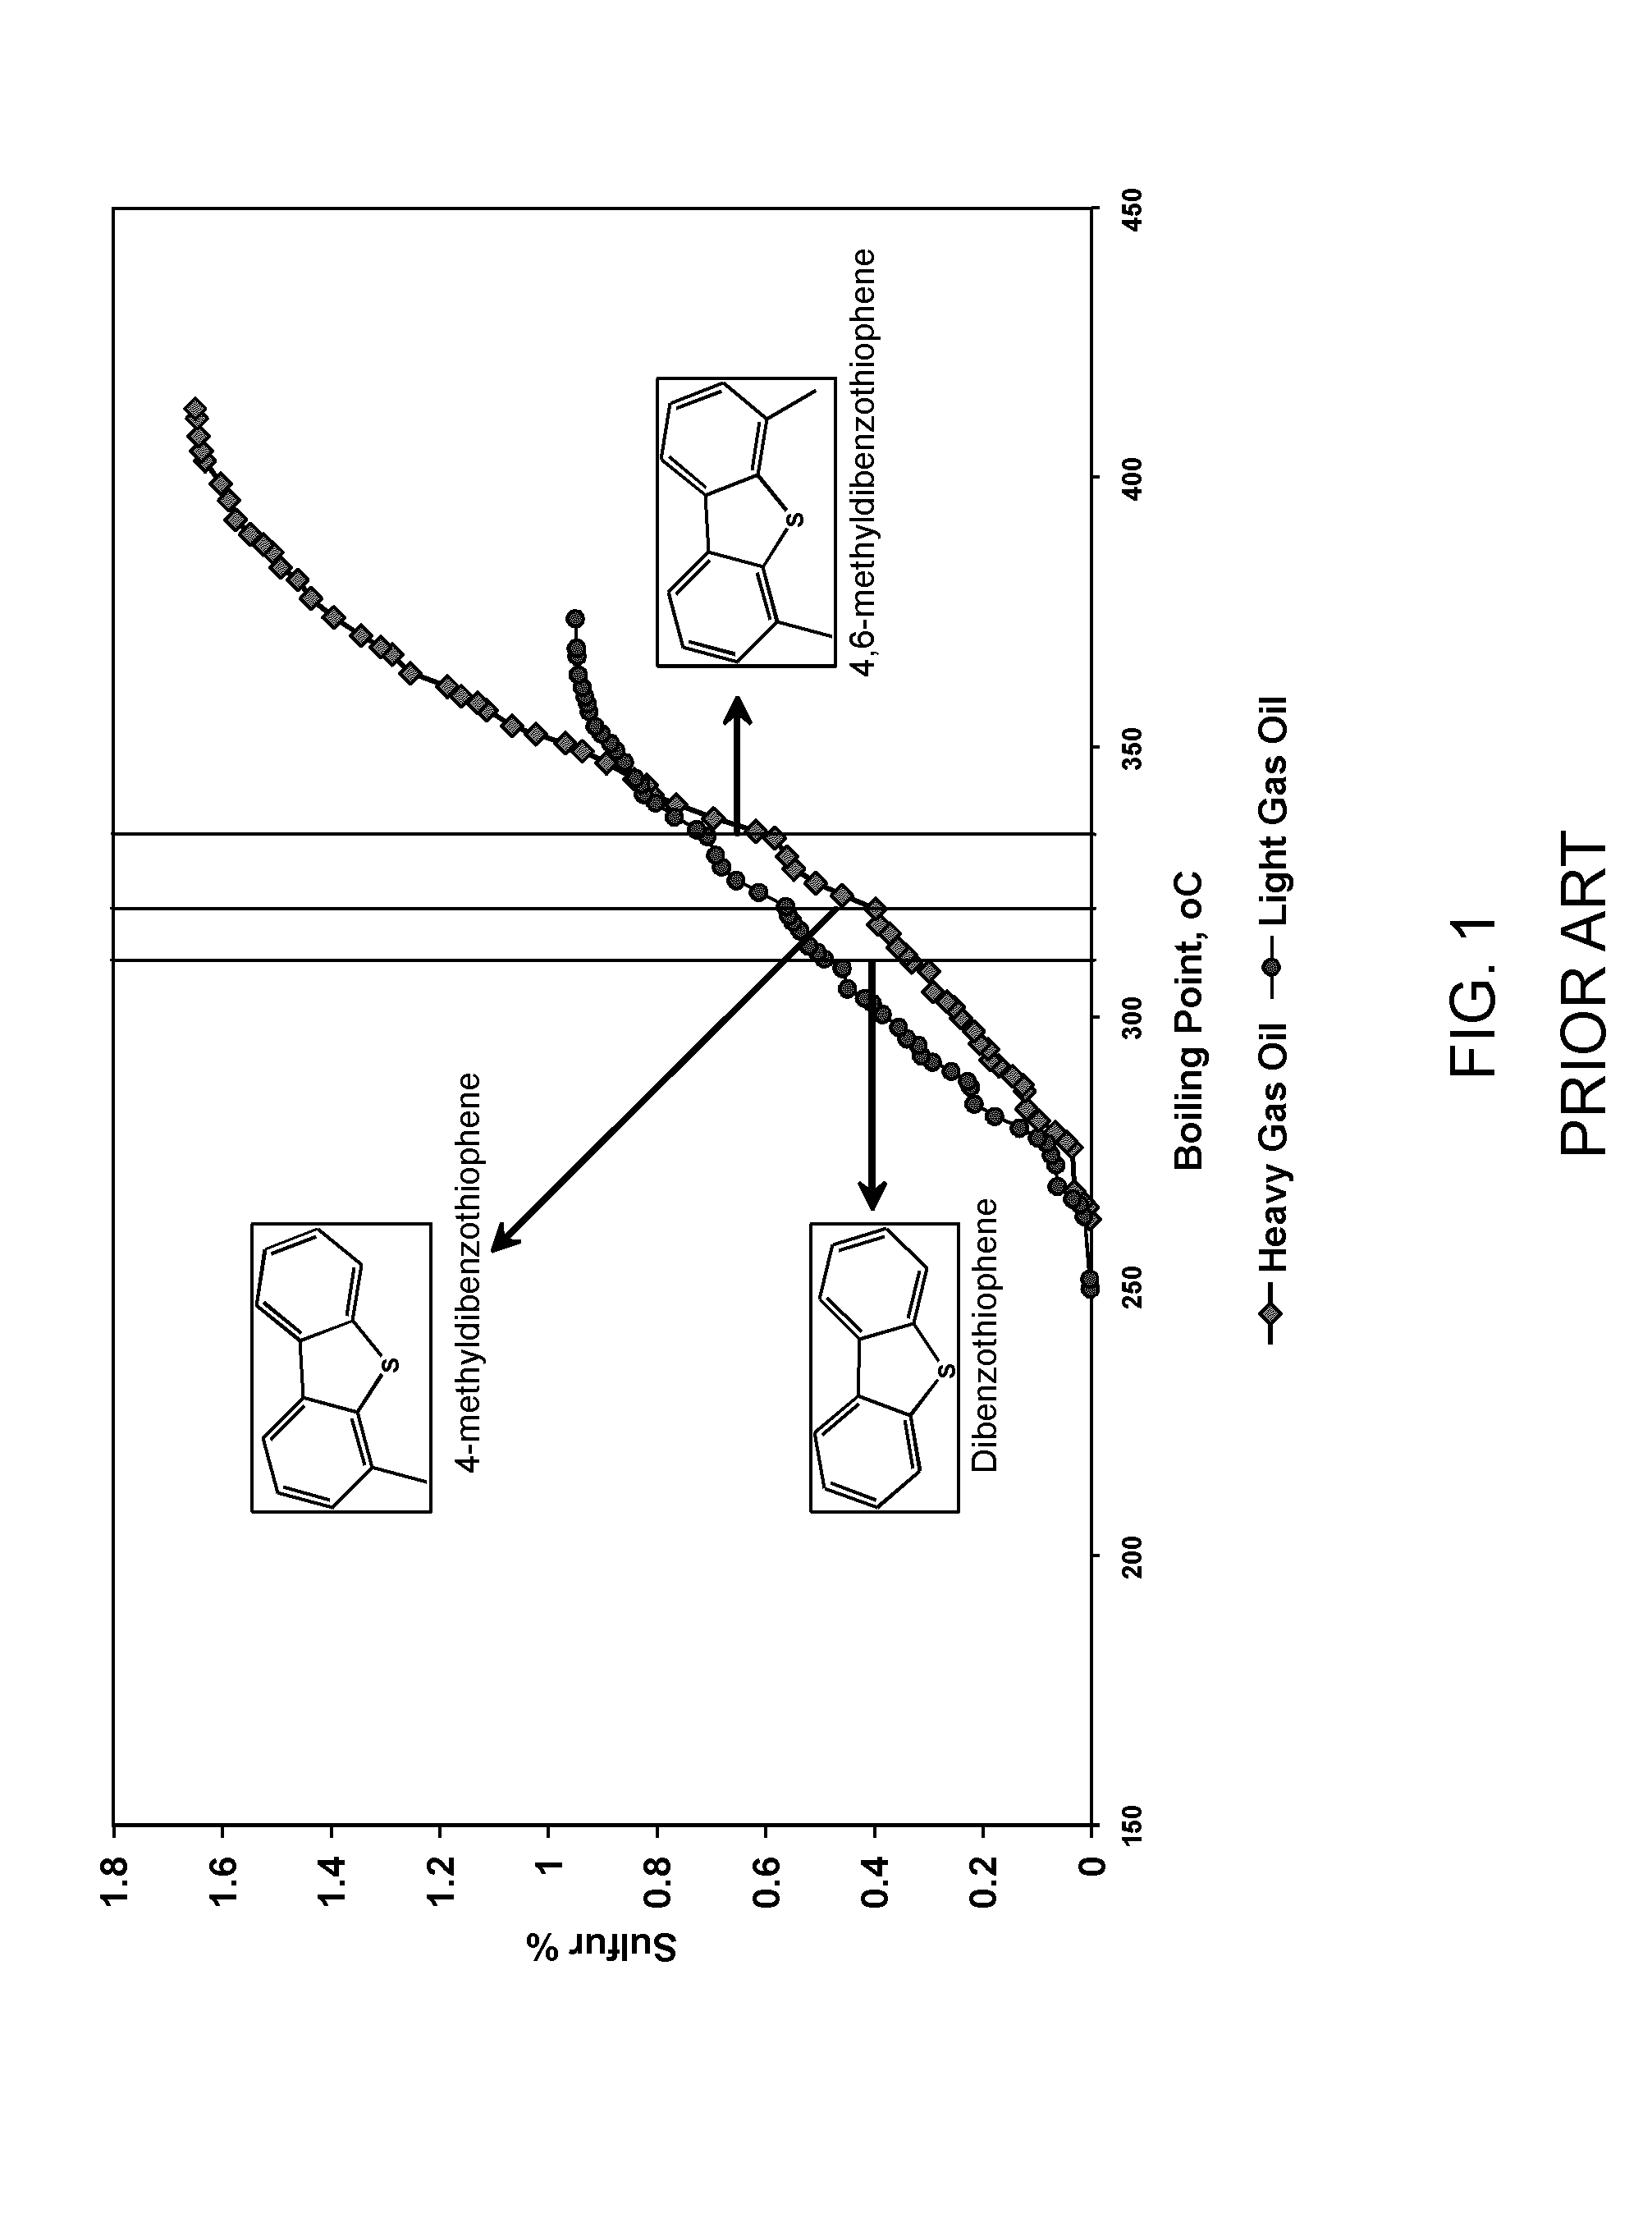 Targeted desulfurization process and apparatus integrating gas phase oxidative desulfurization and hydrodesulfurization to produce diesel fuel having an ultra-low level of organosulfur compounds